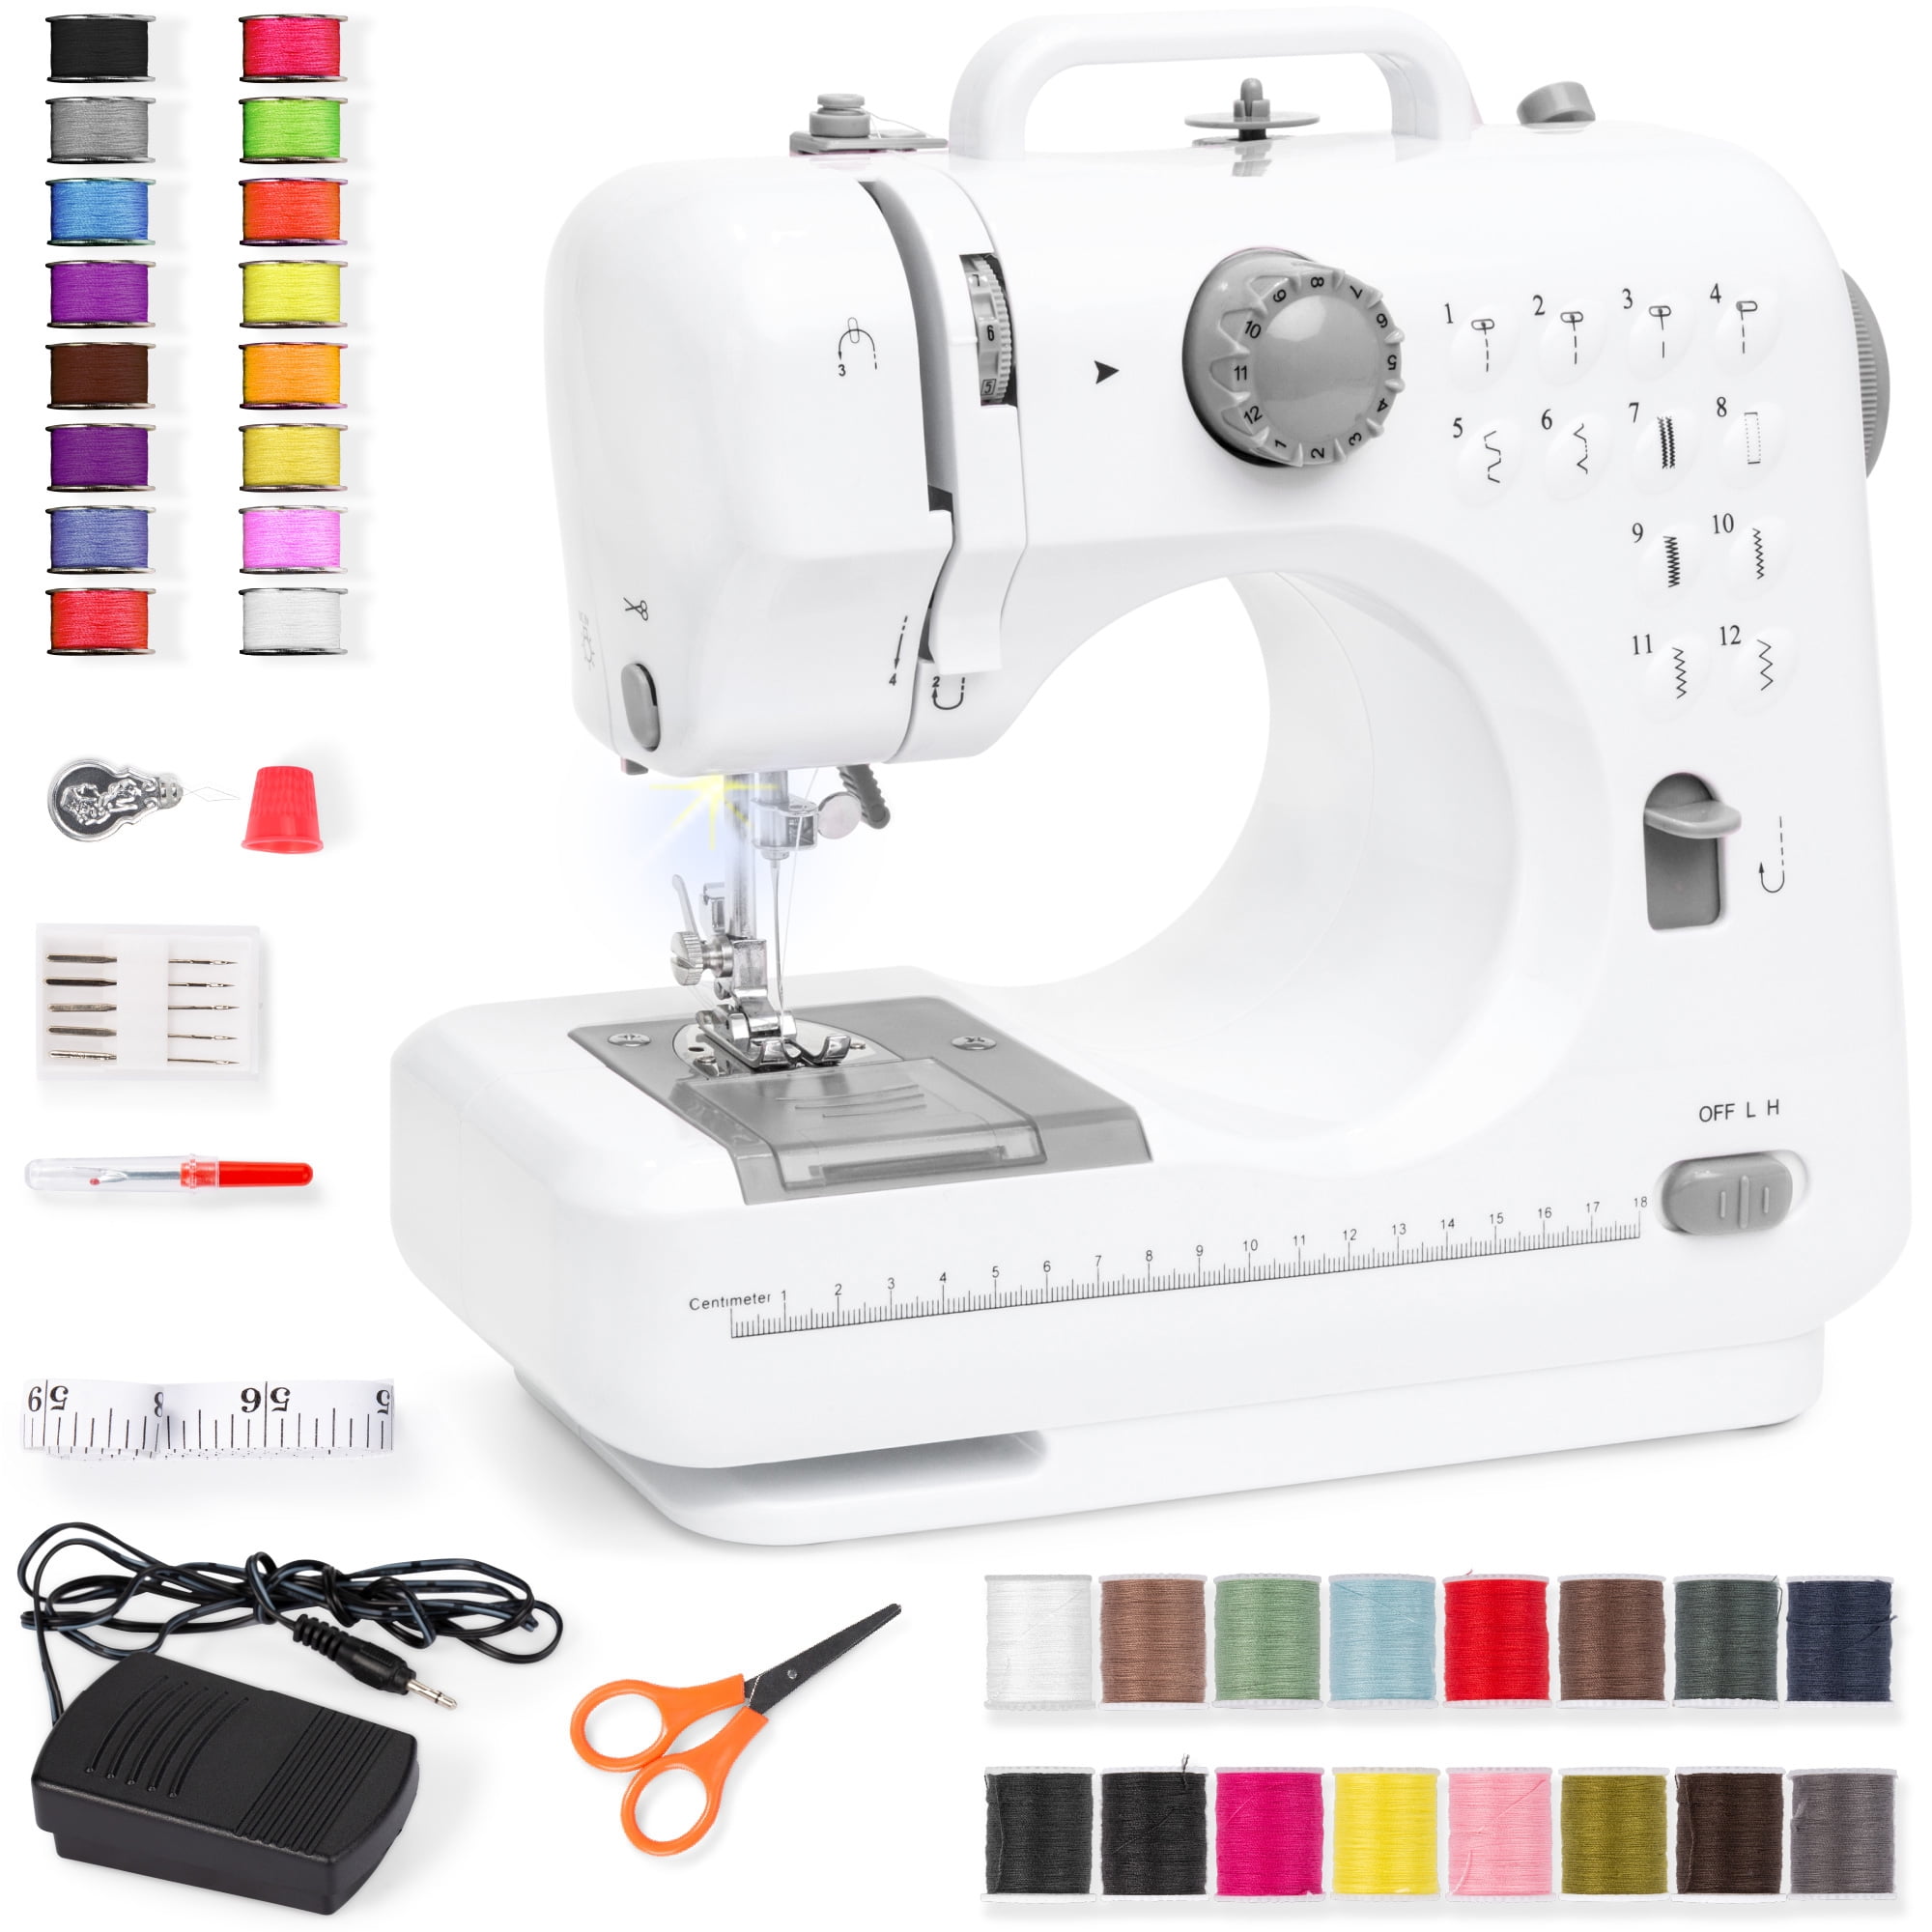 for Fabric Cloth Handicrafts Home Travel Use Sewing Machine Mini Portable Handle Electric Sewing Machine for Beginners Adult,Household Quick Repairing Tool with Conventional Kit